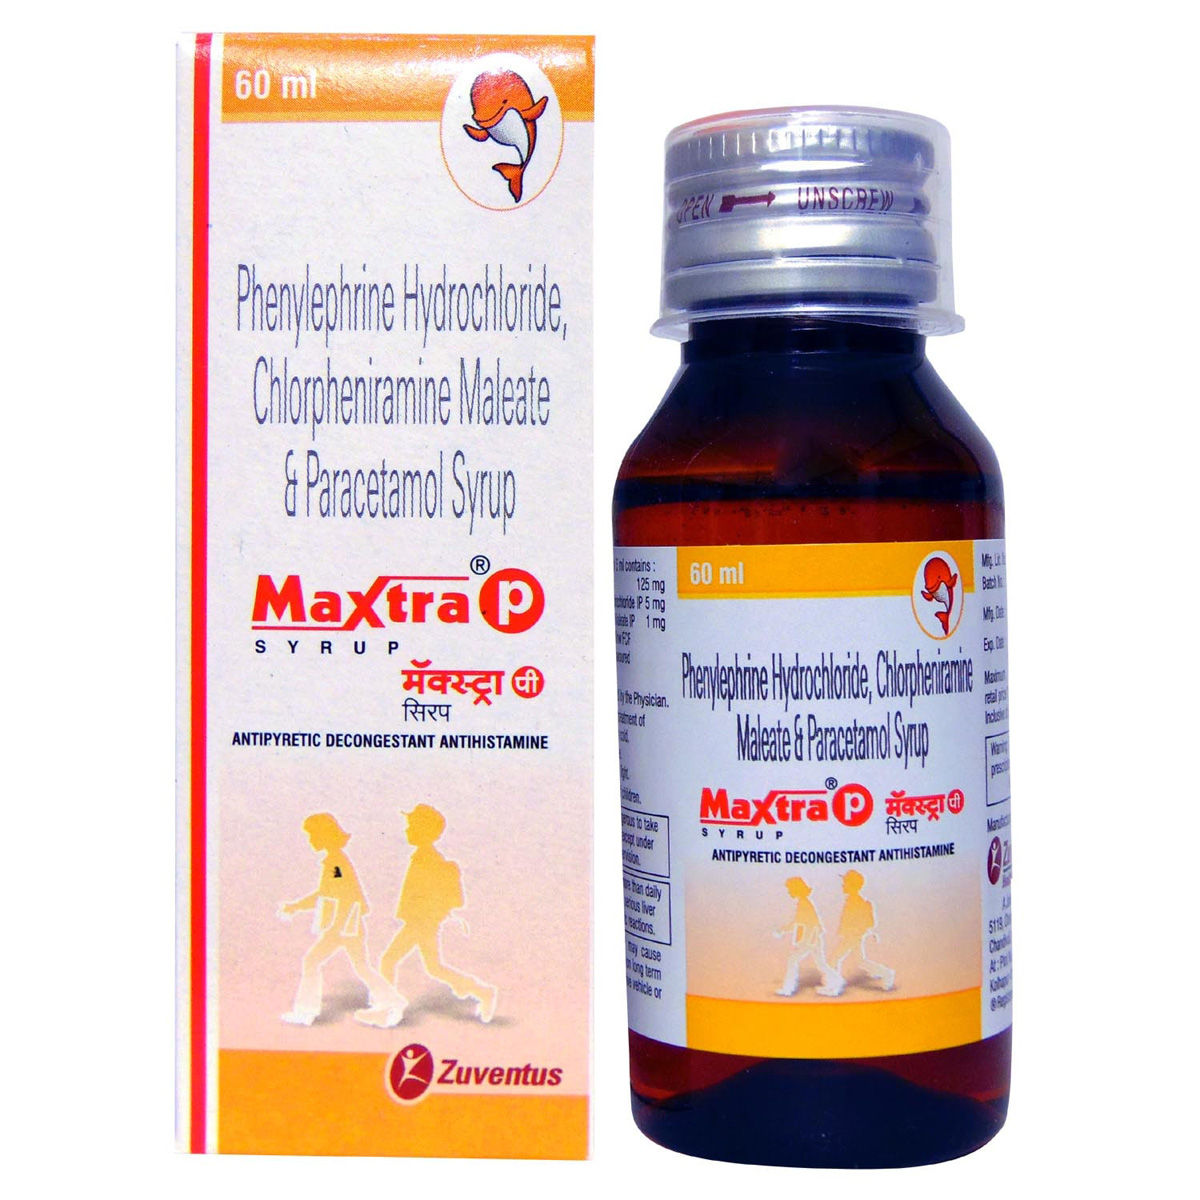 Maxtra P Syrup 60 ml Price, Uses, Side Effects, Composition